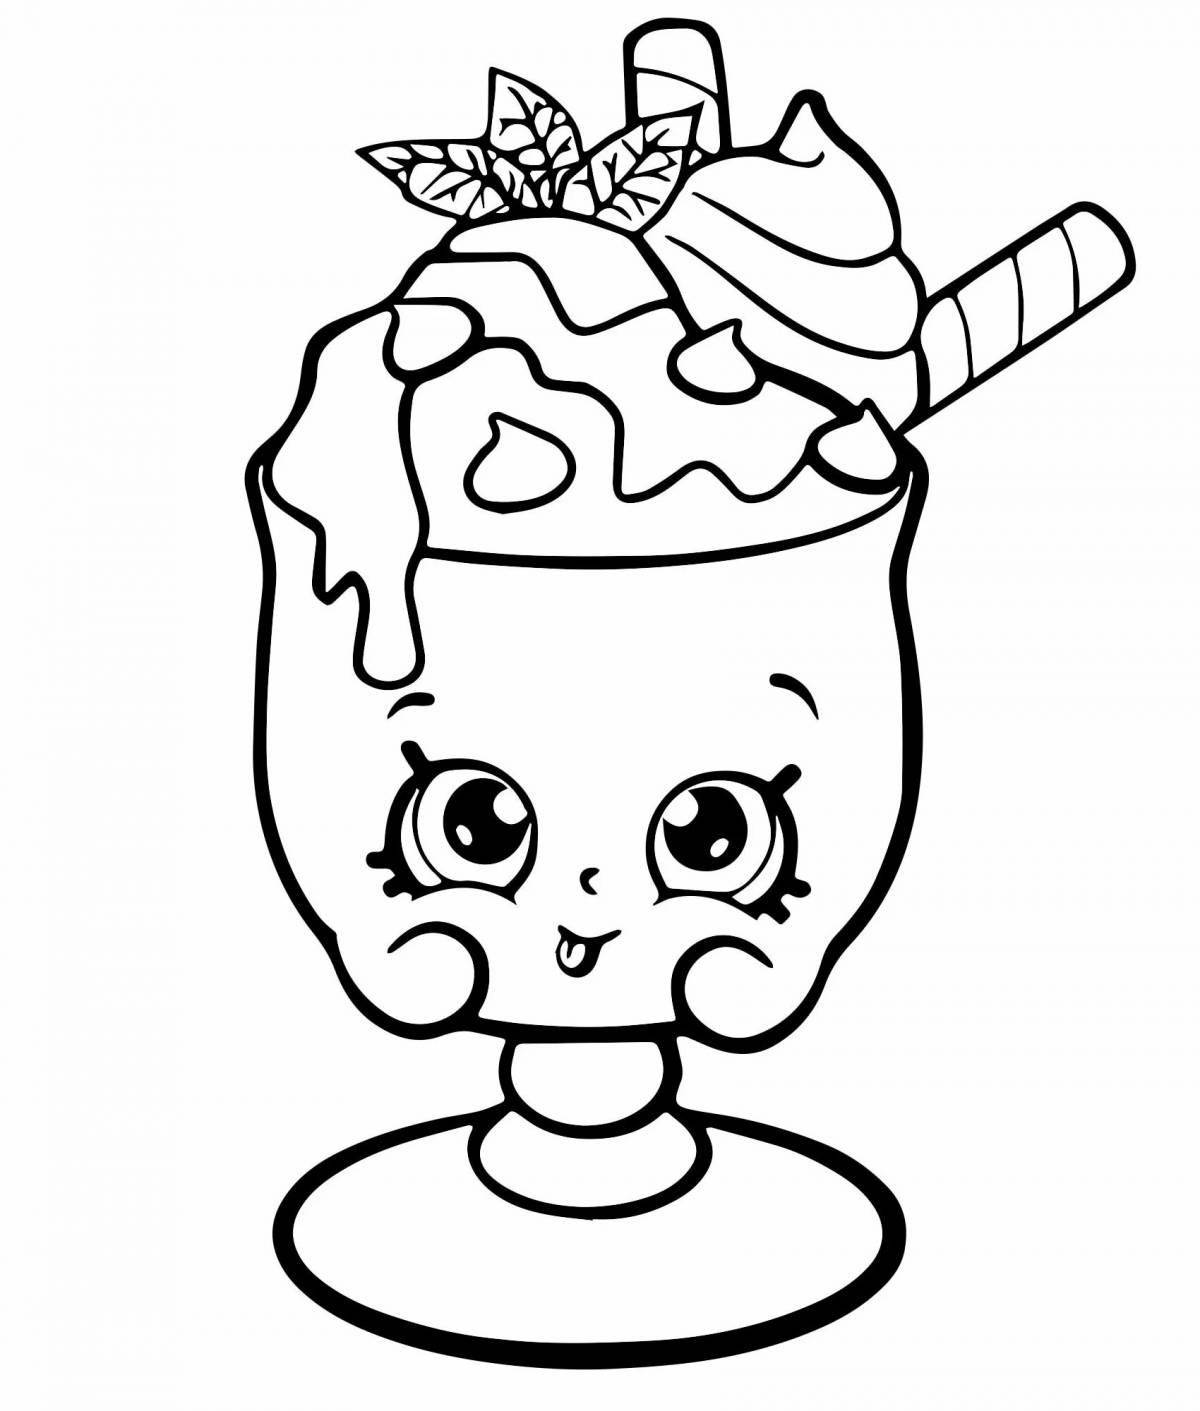 Shopinks innovative coloring pages